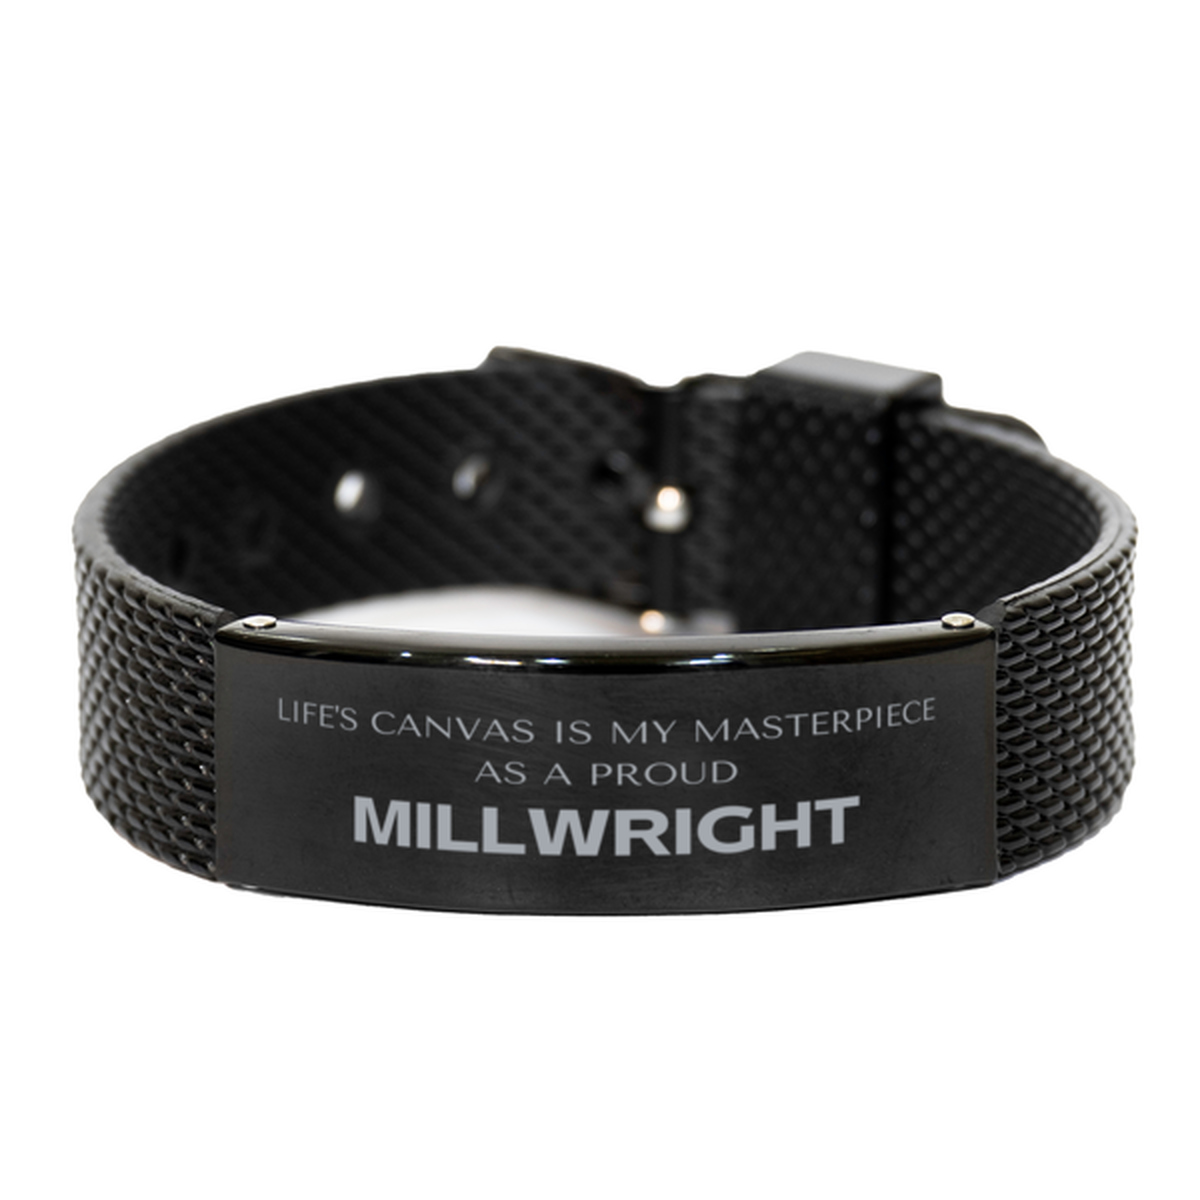 Proud Millwright Gifts, Life's canvas is my masterpiece, Epic Birthday Christmas Unique Black Shark Mesh Bracelet For Millwright, Coworkers, Men, Women, Friends